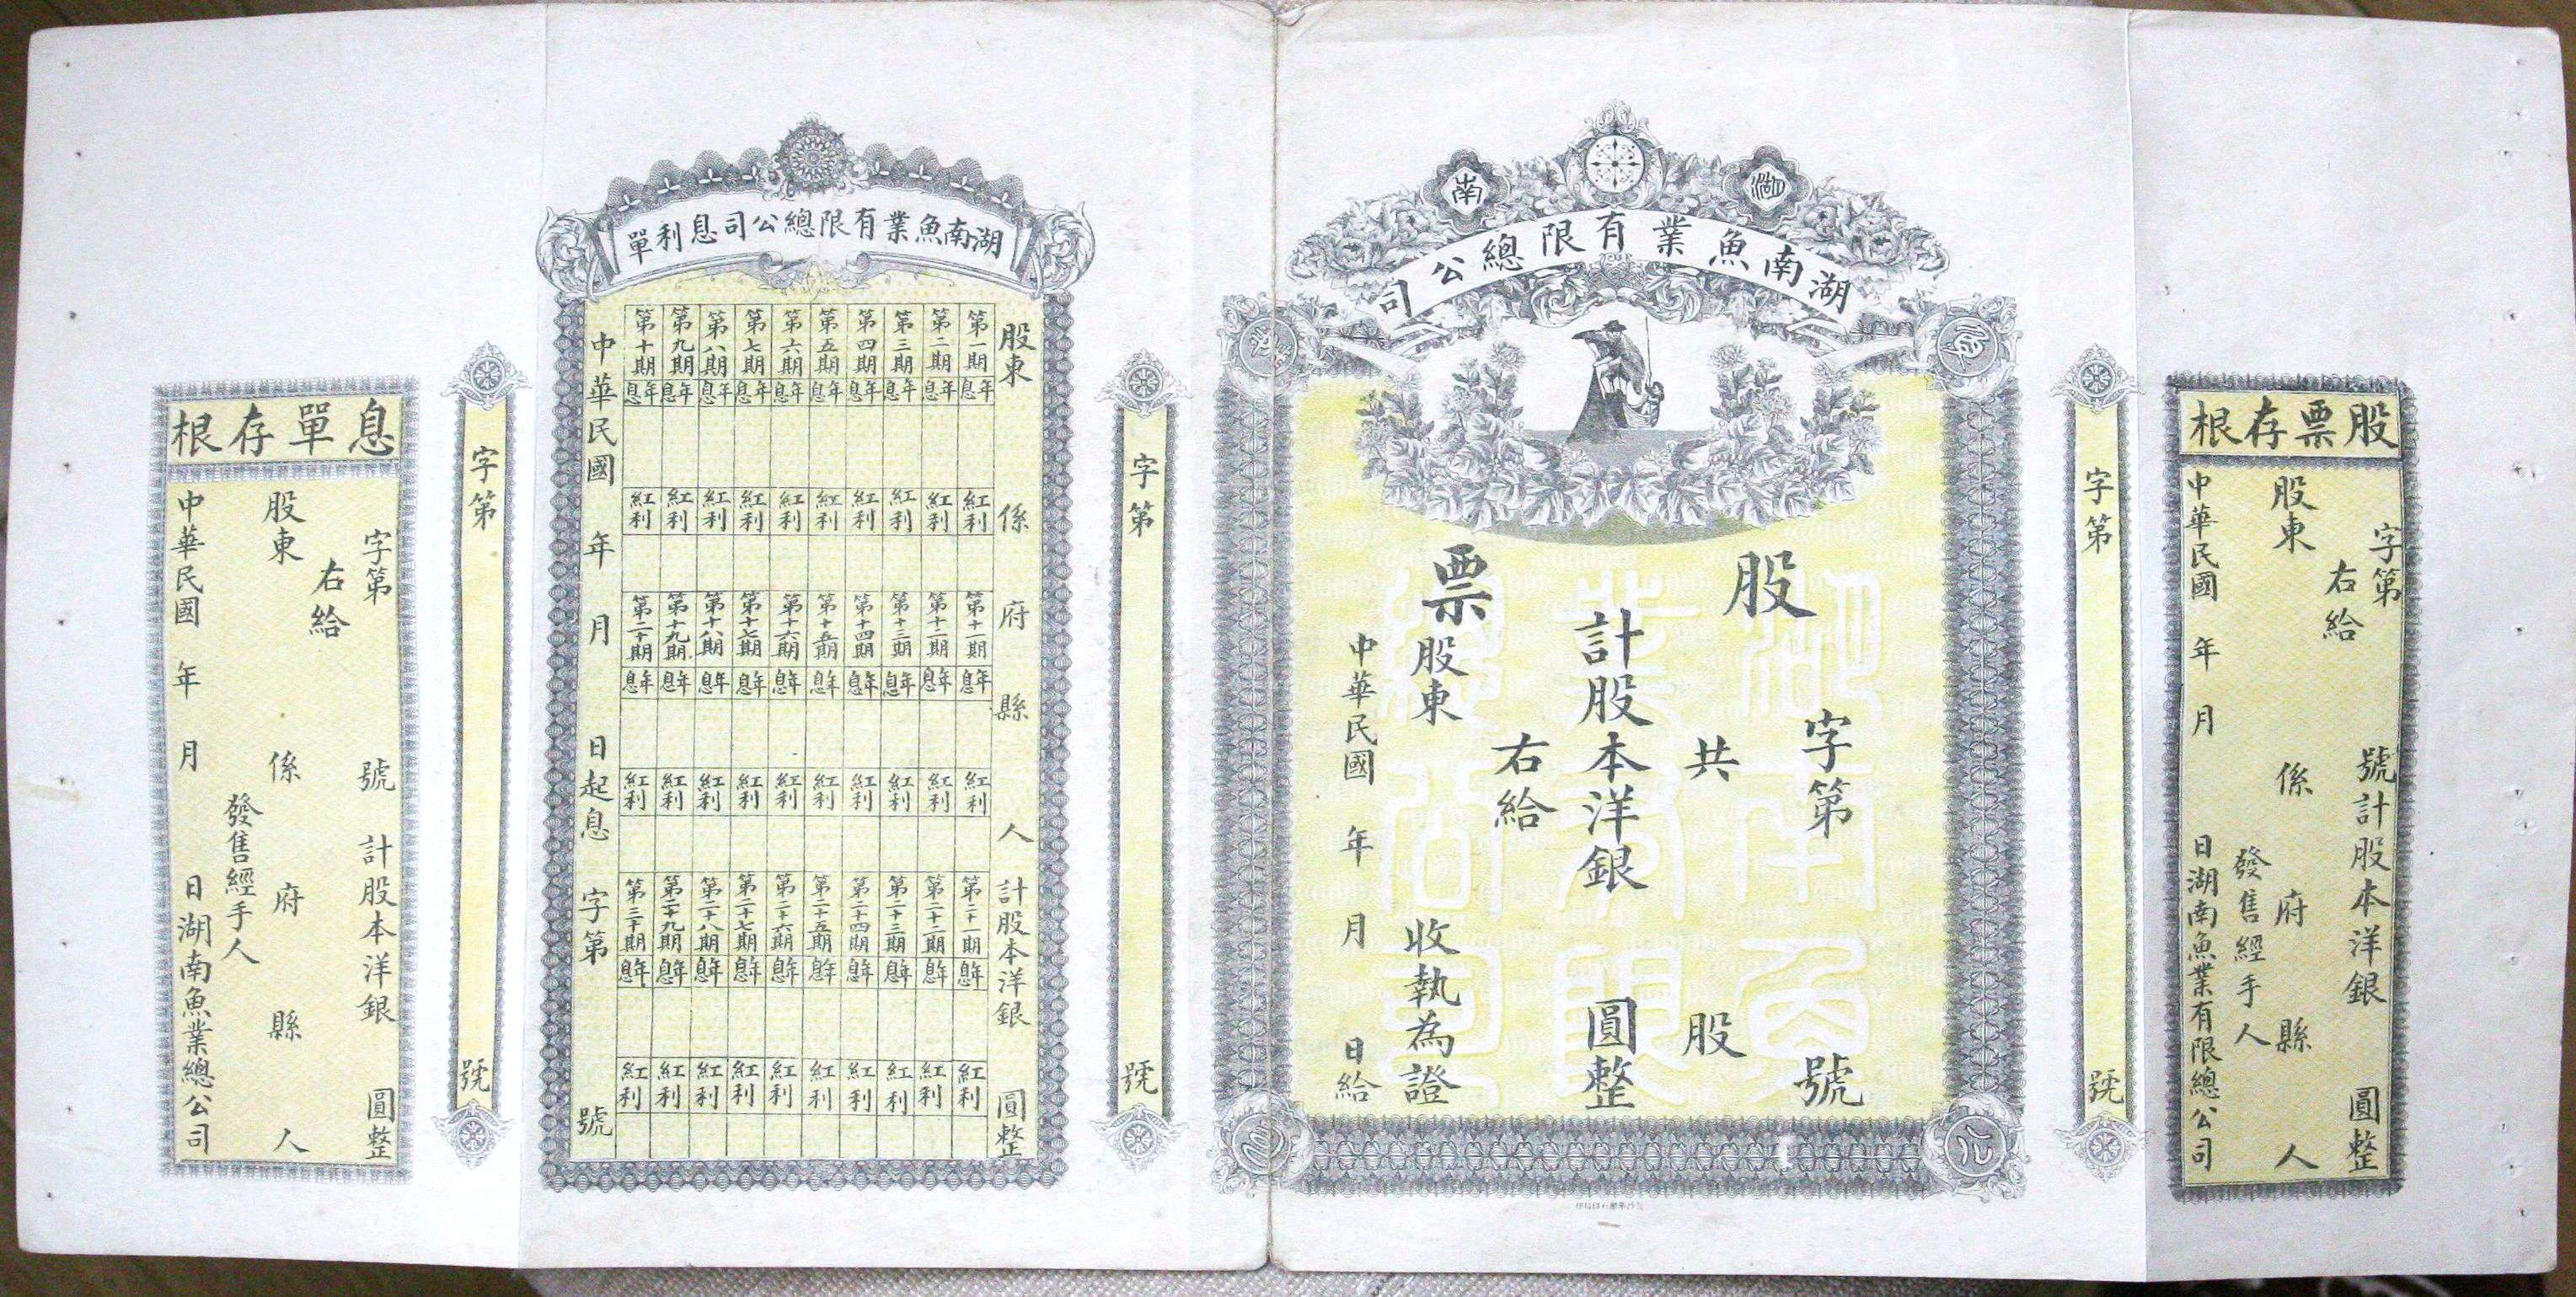 S0170, Hunan Province Fishery Co., Ltd, Stock Certificate of China 1920 - Click Image to Close